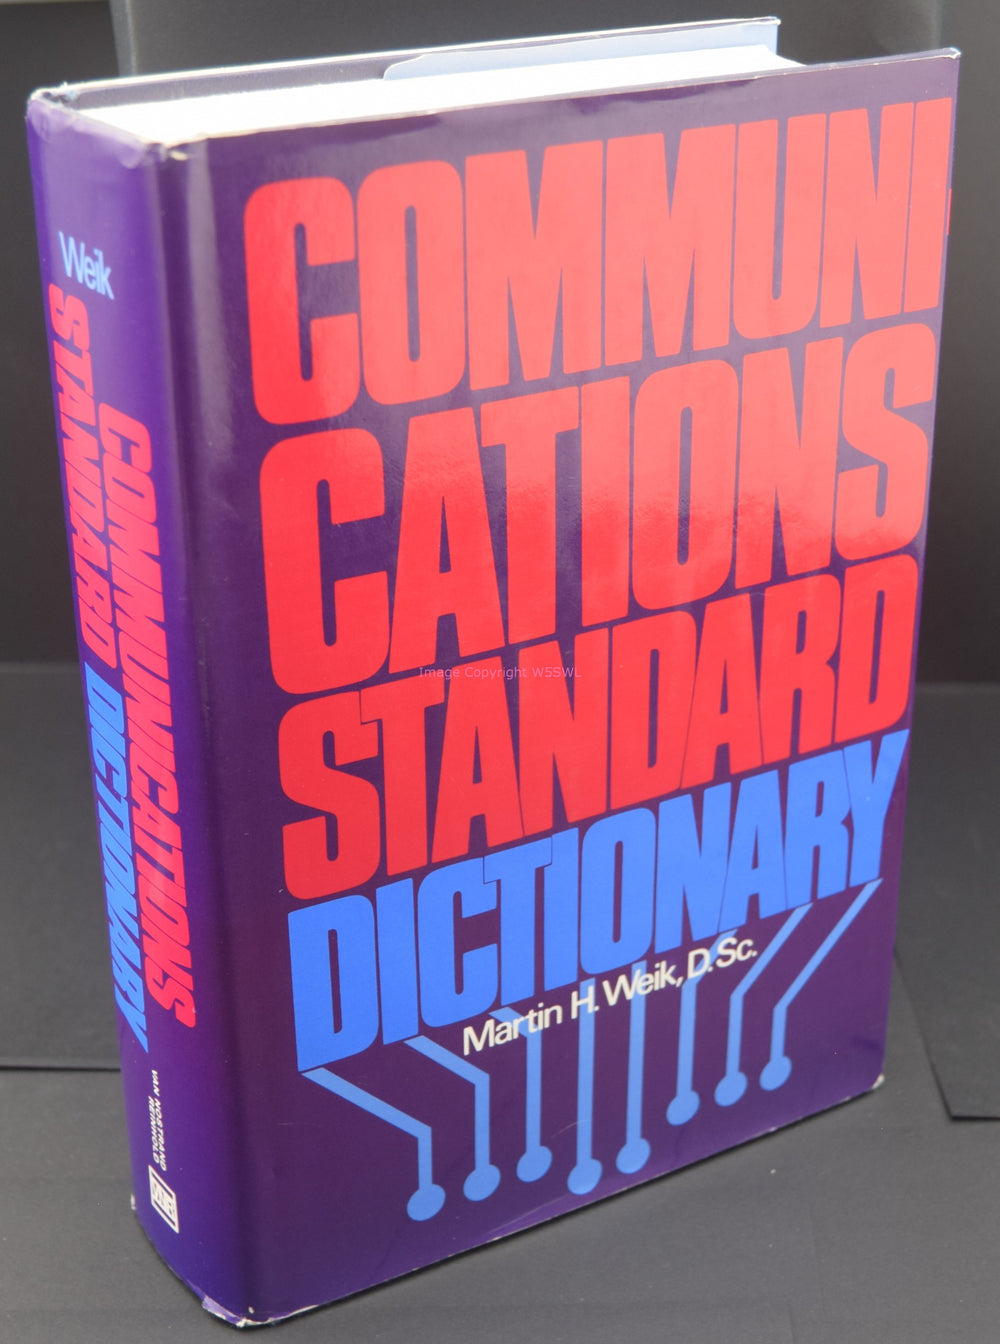 Communications Standard Dictionary Martin Weik - Dave's Hobby Shop by W5SWL